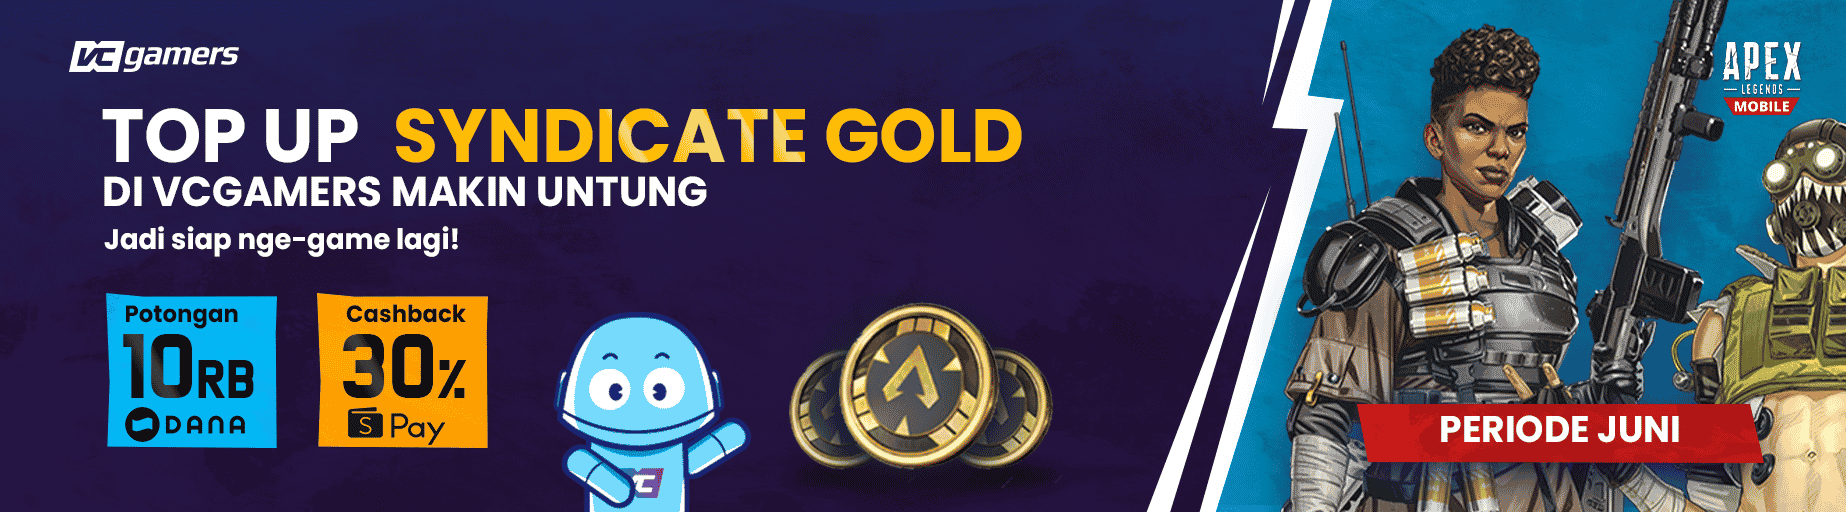 Top Up Syndicate Gold (2)